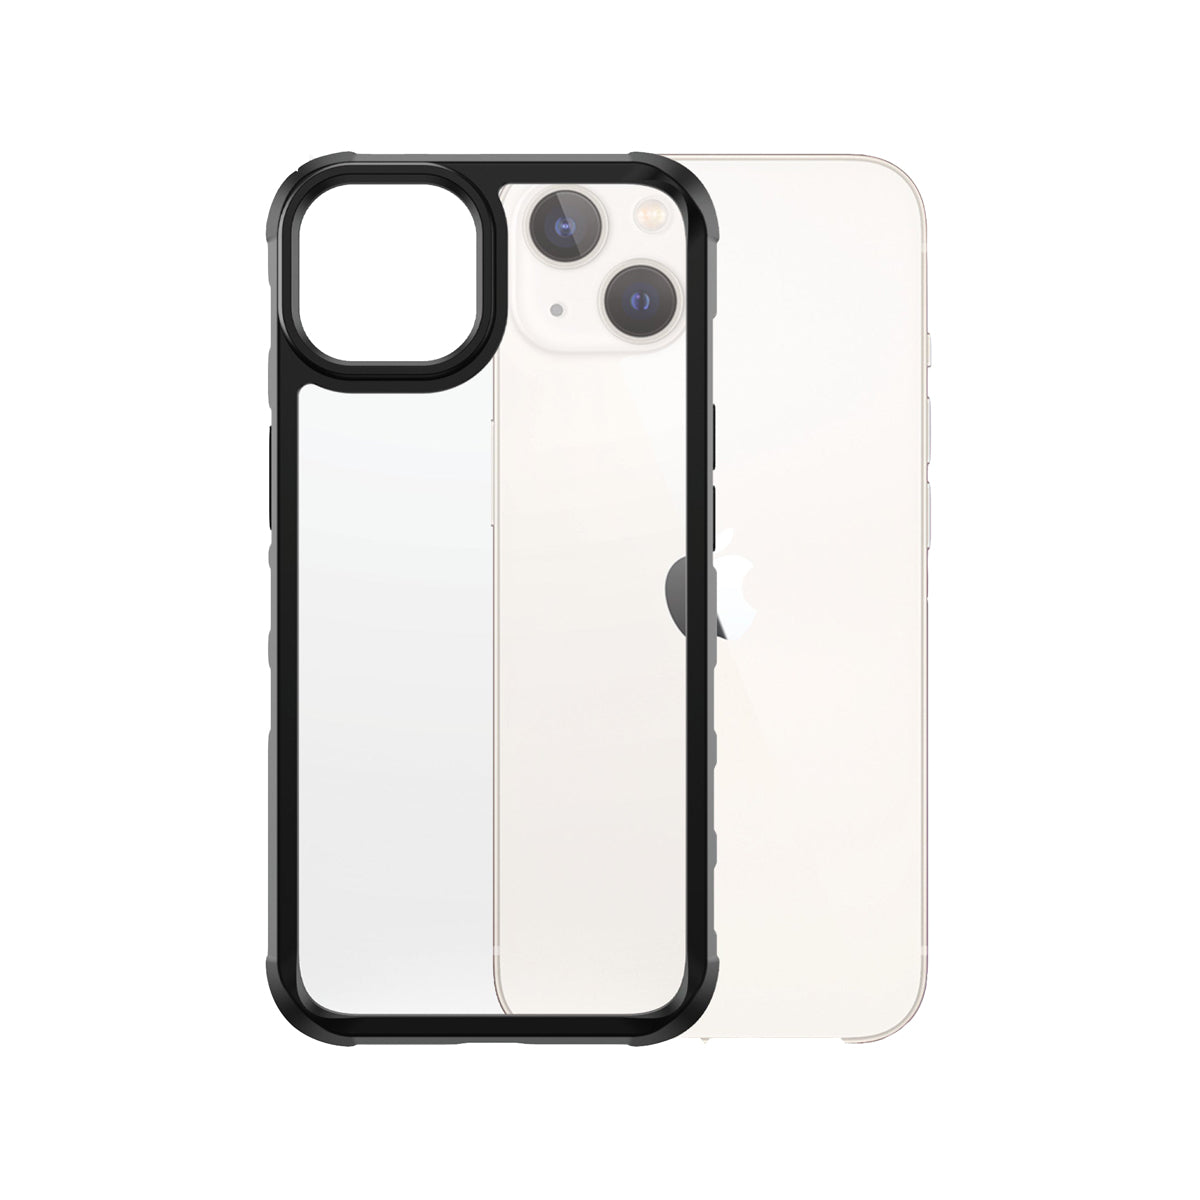 PanzerGlass SilverBullet Clear Case for iPhone 13 - Black AB